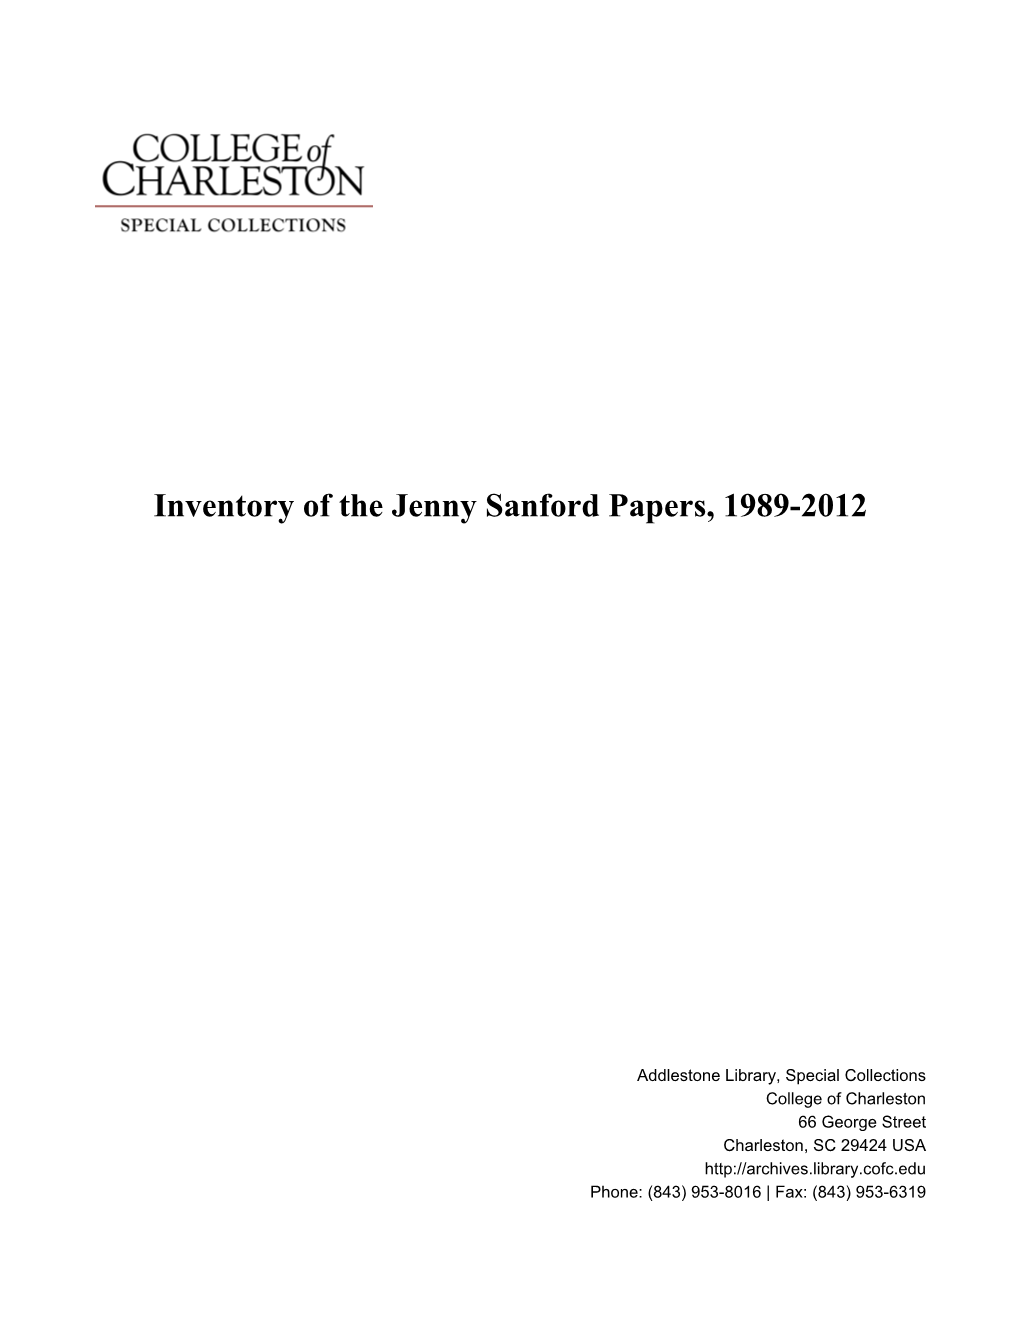 Inventory of the Jenny Sanford Papers, 1989-2012